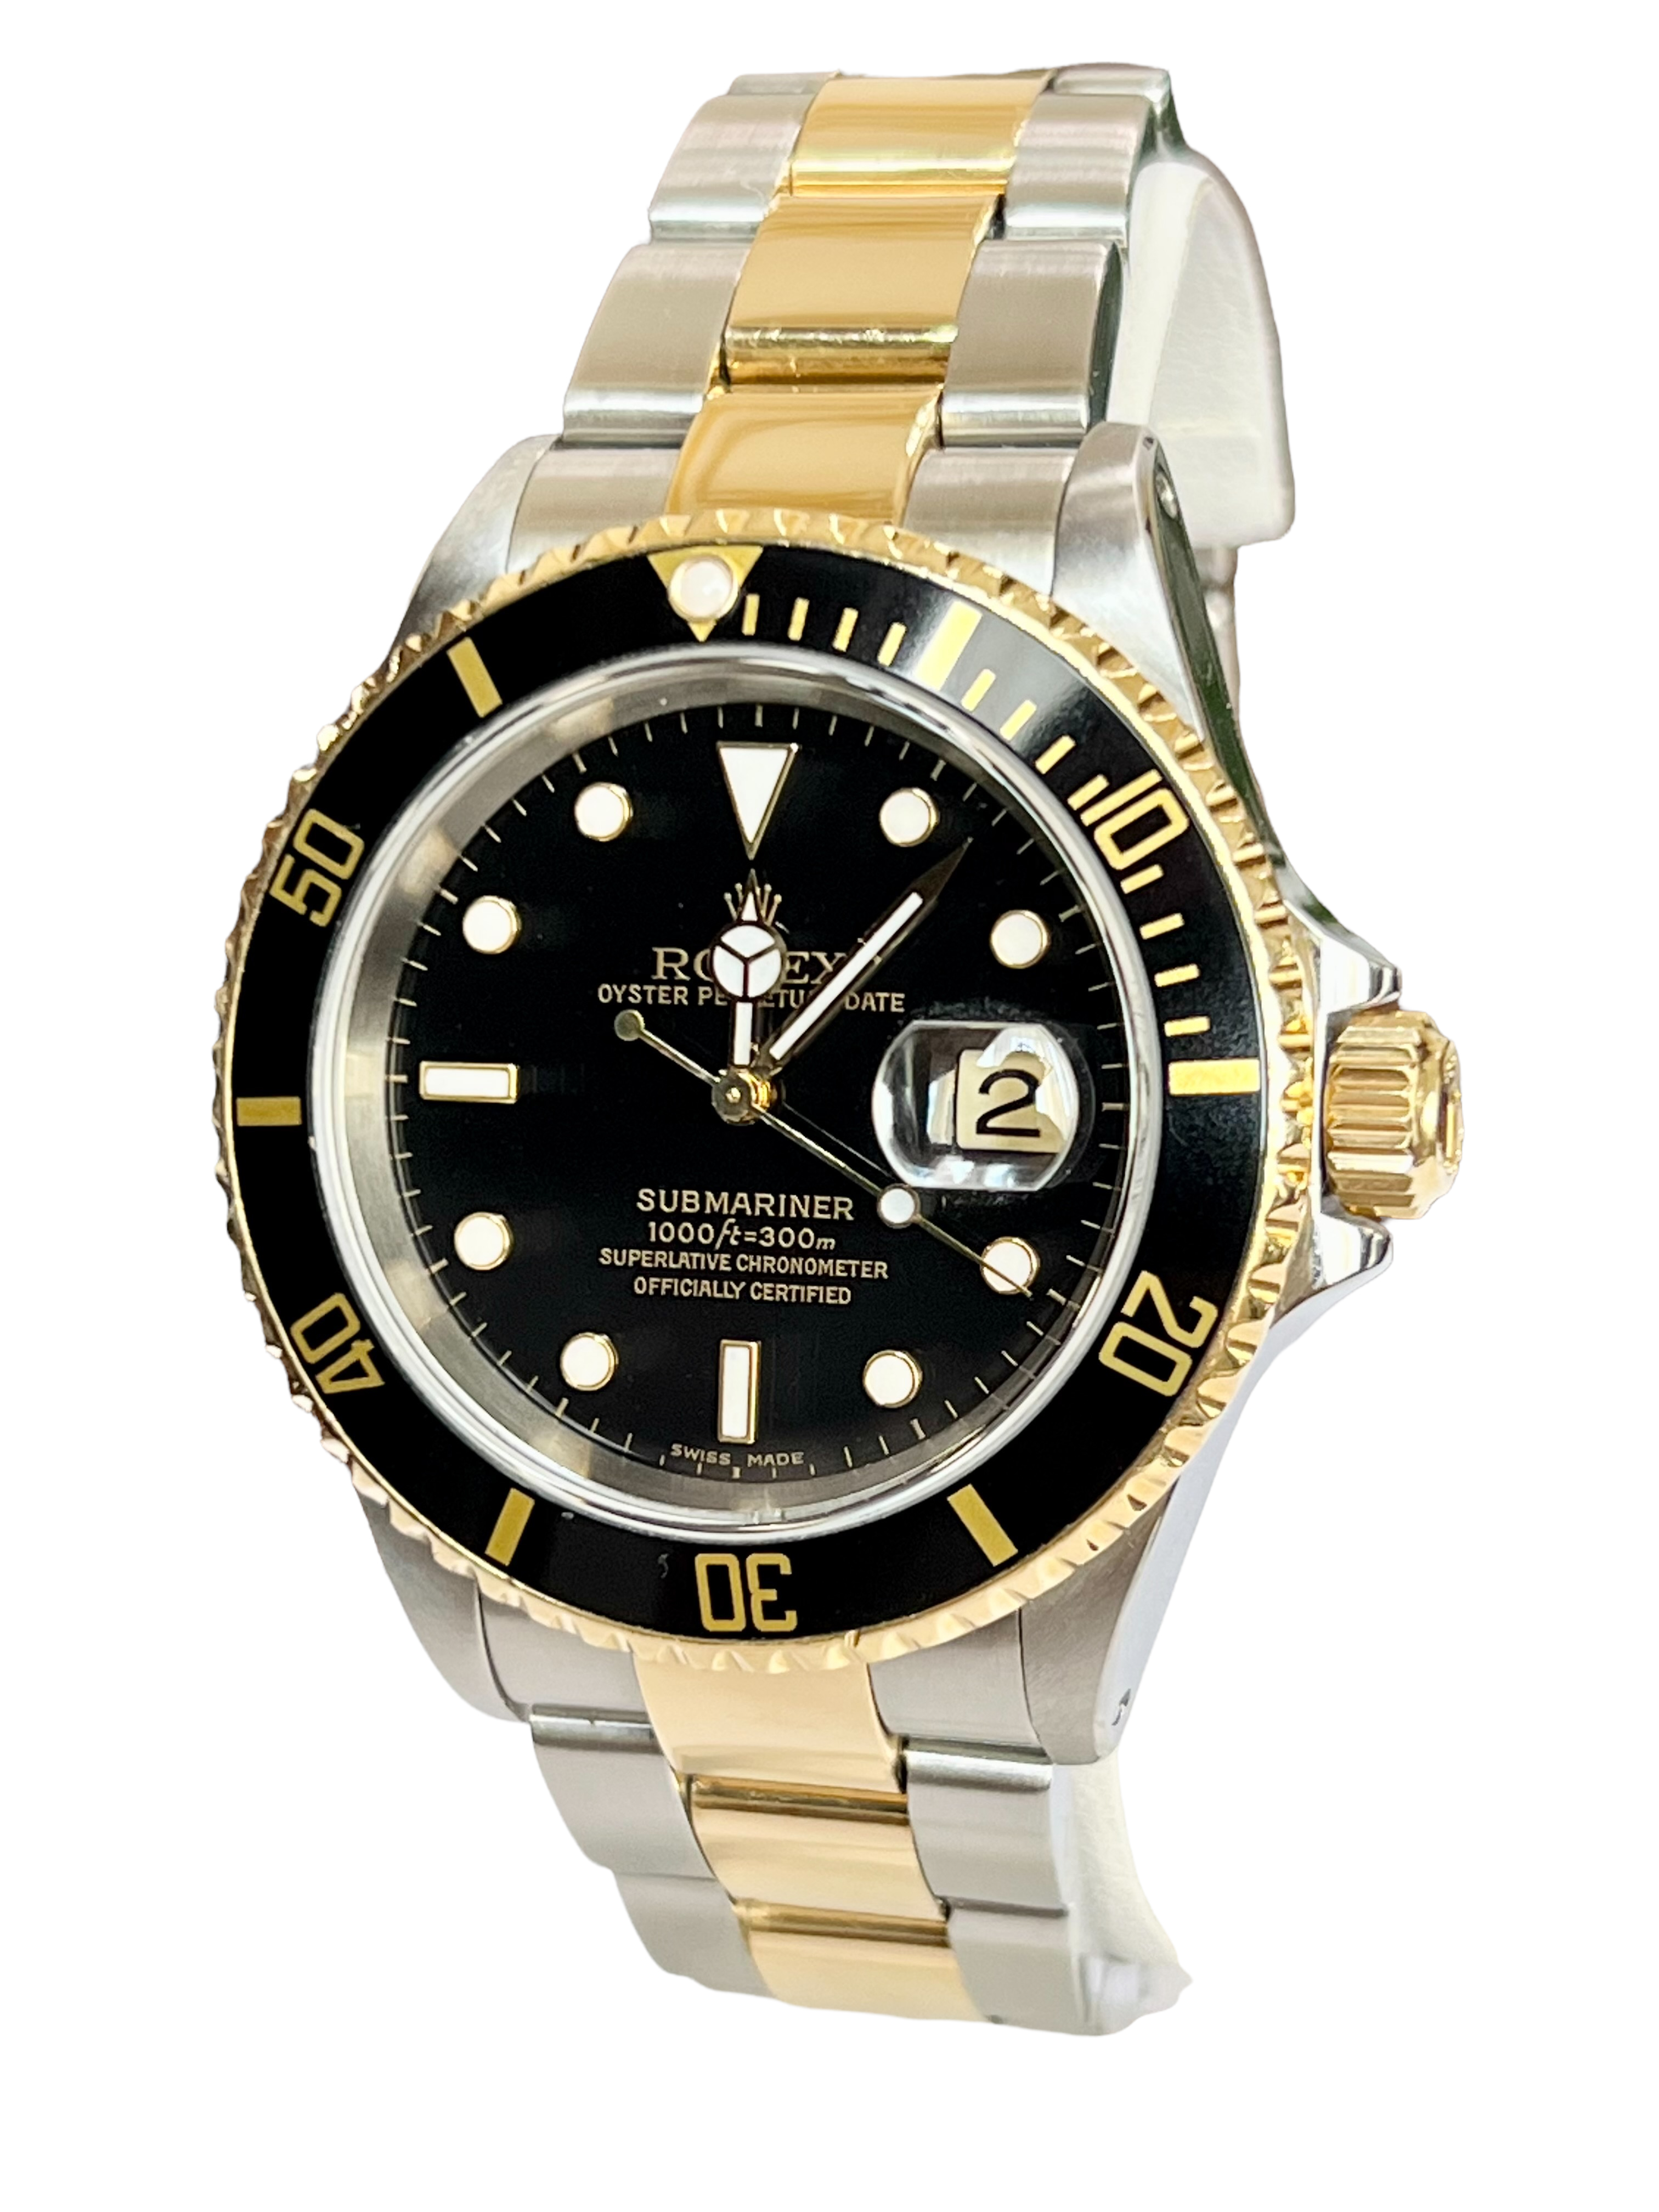 ROLEX SUBMARINER DATE 40MM TWO TONE BLACK DIAL AUTOMATIC REF: 16613